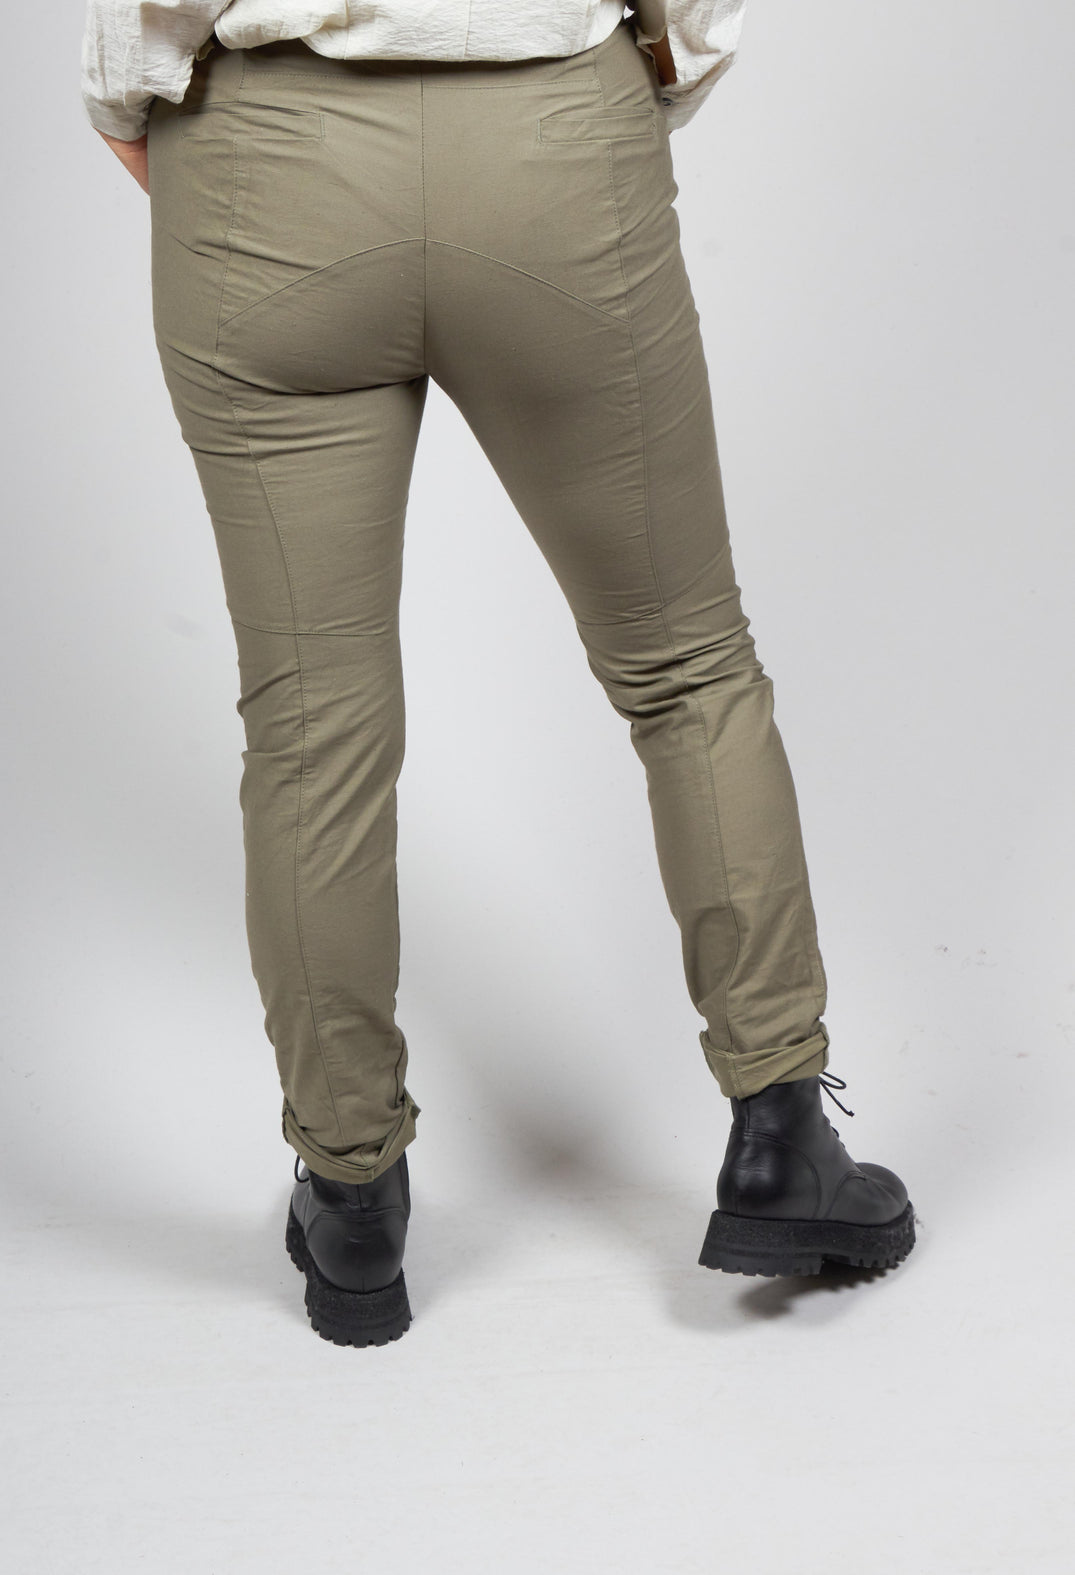 Donoma Trousers in Argil